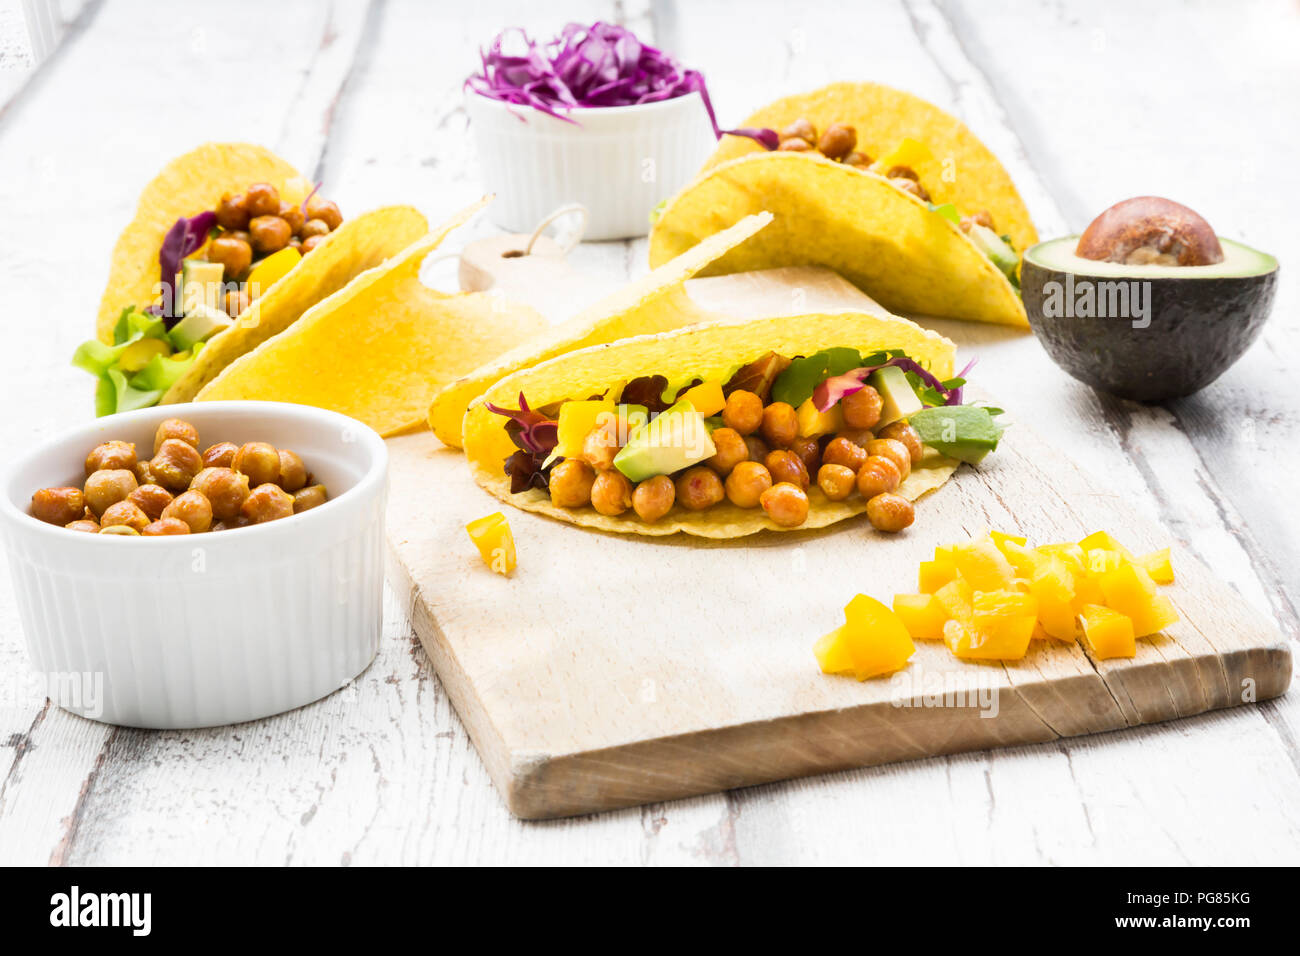 https://c8.alamy.com/comp/PG85KG/vegetarian-tacos-filled-with-in-curcuma-roasted-chick-peas-yellow-paprika-avocado-salad-and-red-cabbage-PG85KG.jpg